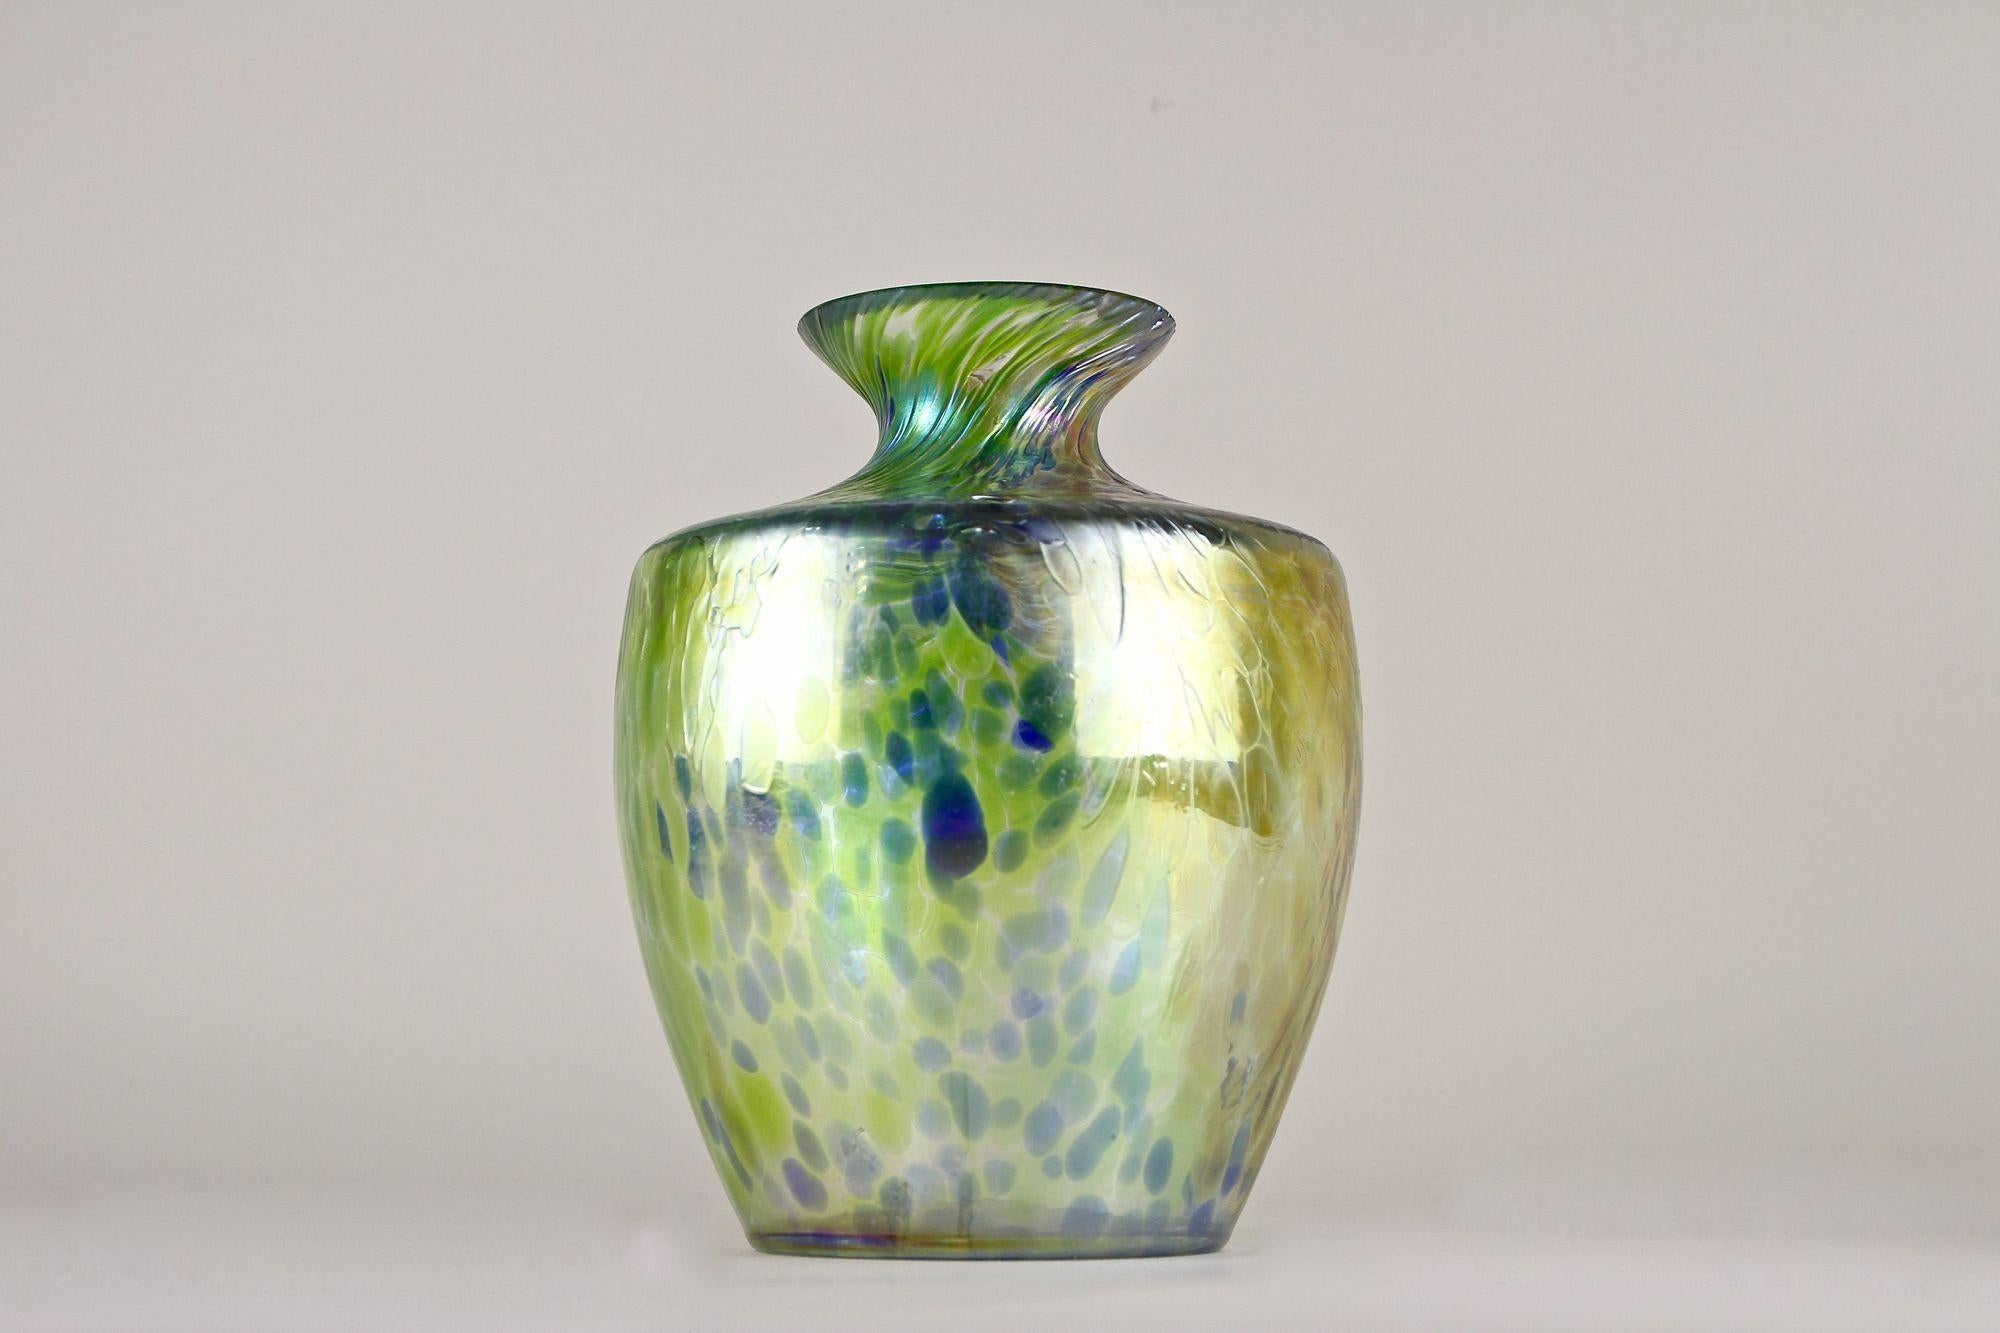 Iridescent Art Nouveau Glass Vase Attributed To Fritz Heckert, Bohemia ca. 1905 For Sale 4